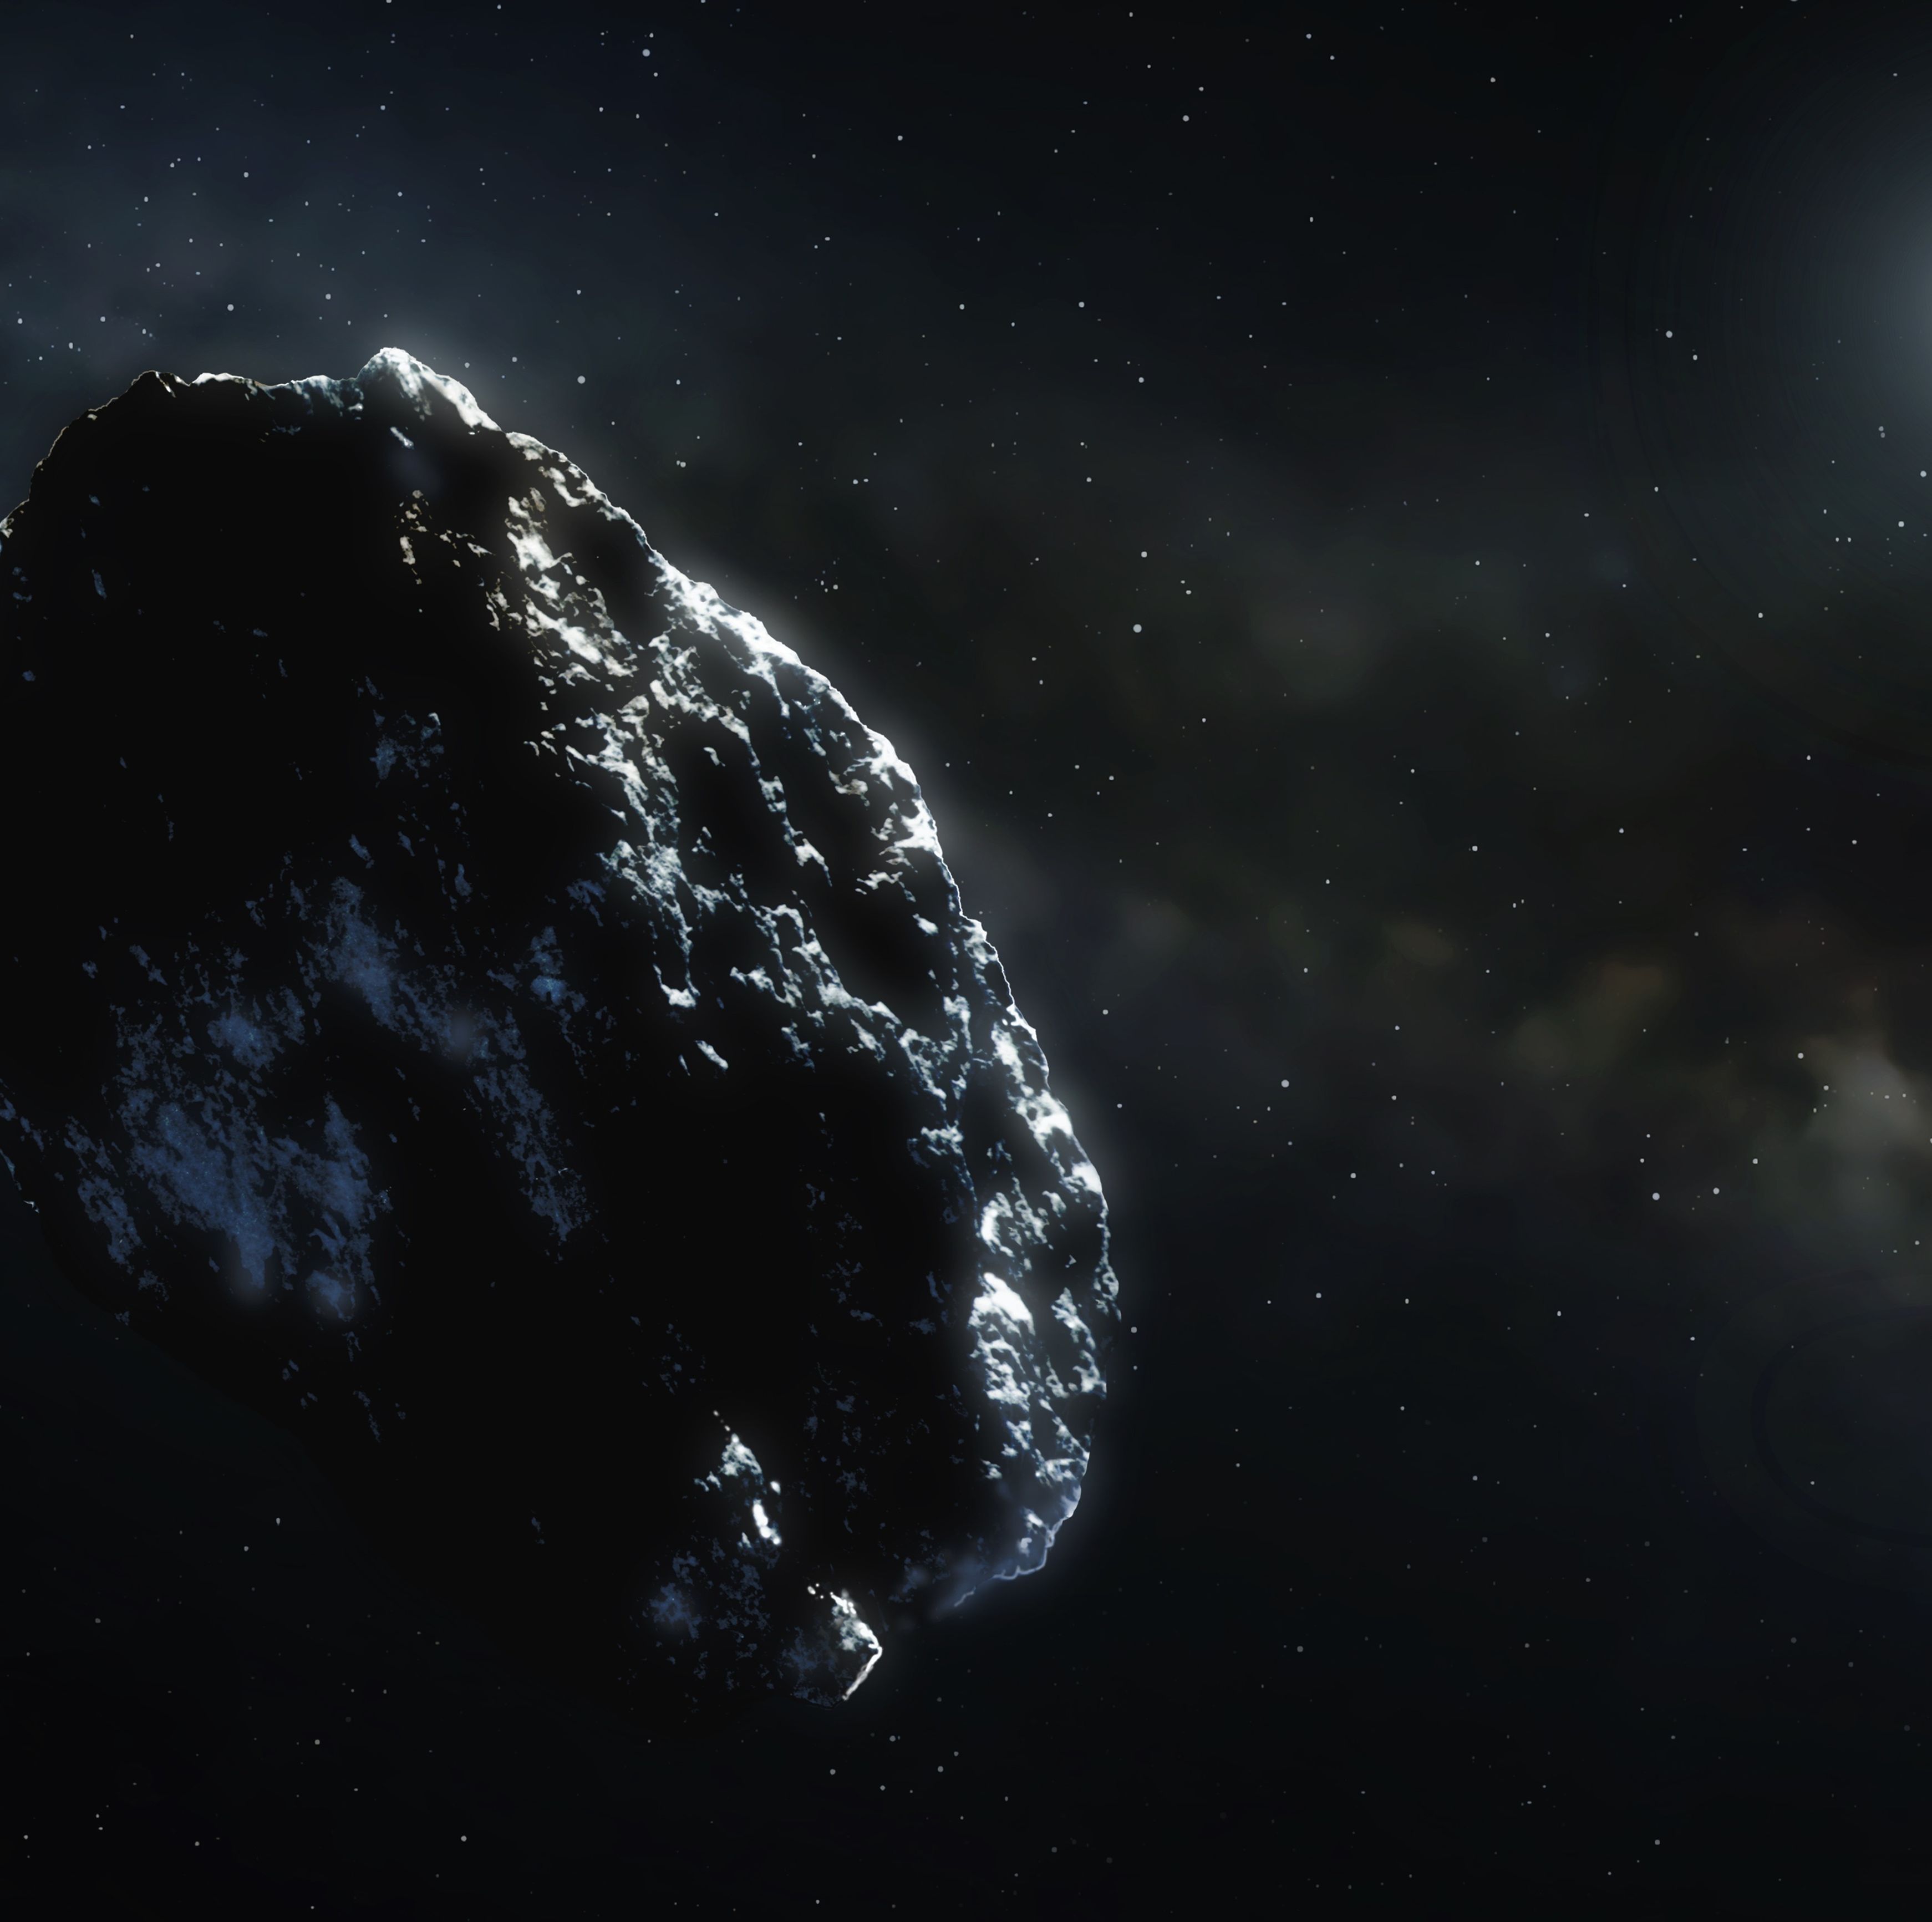 NASA Crashed a Spacecraft Into an Asteroid and There Could Be Some Consequences